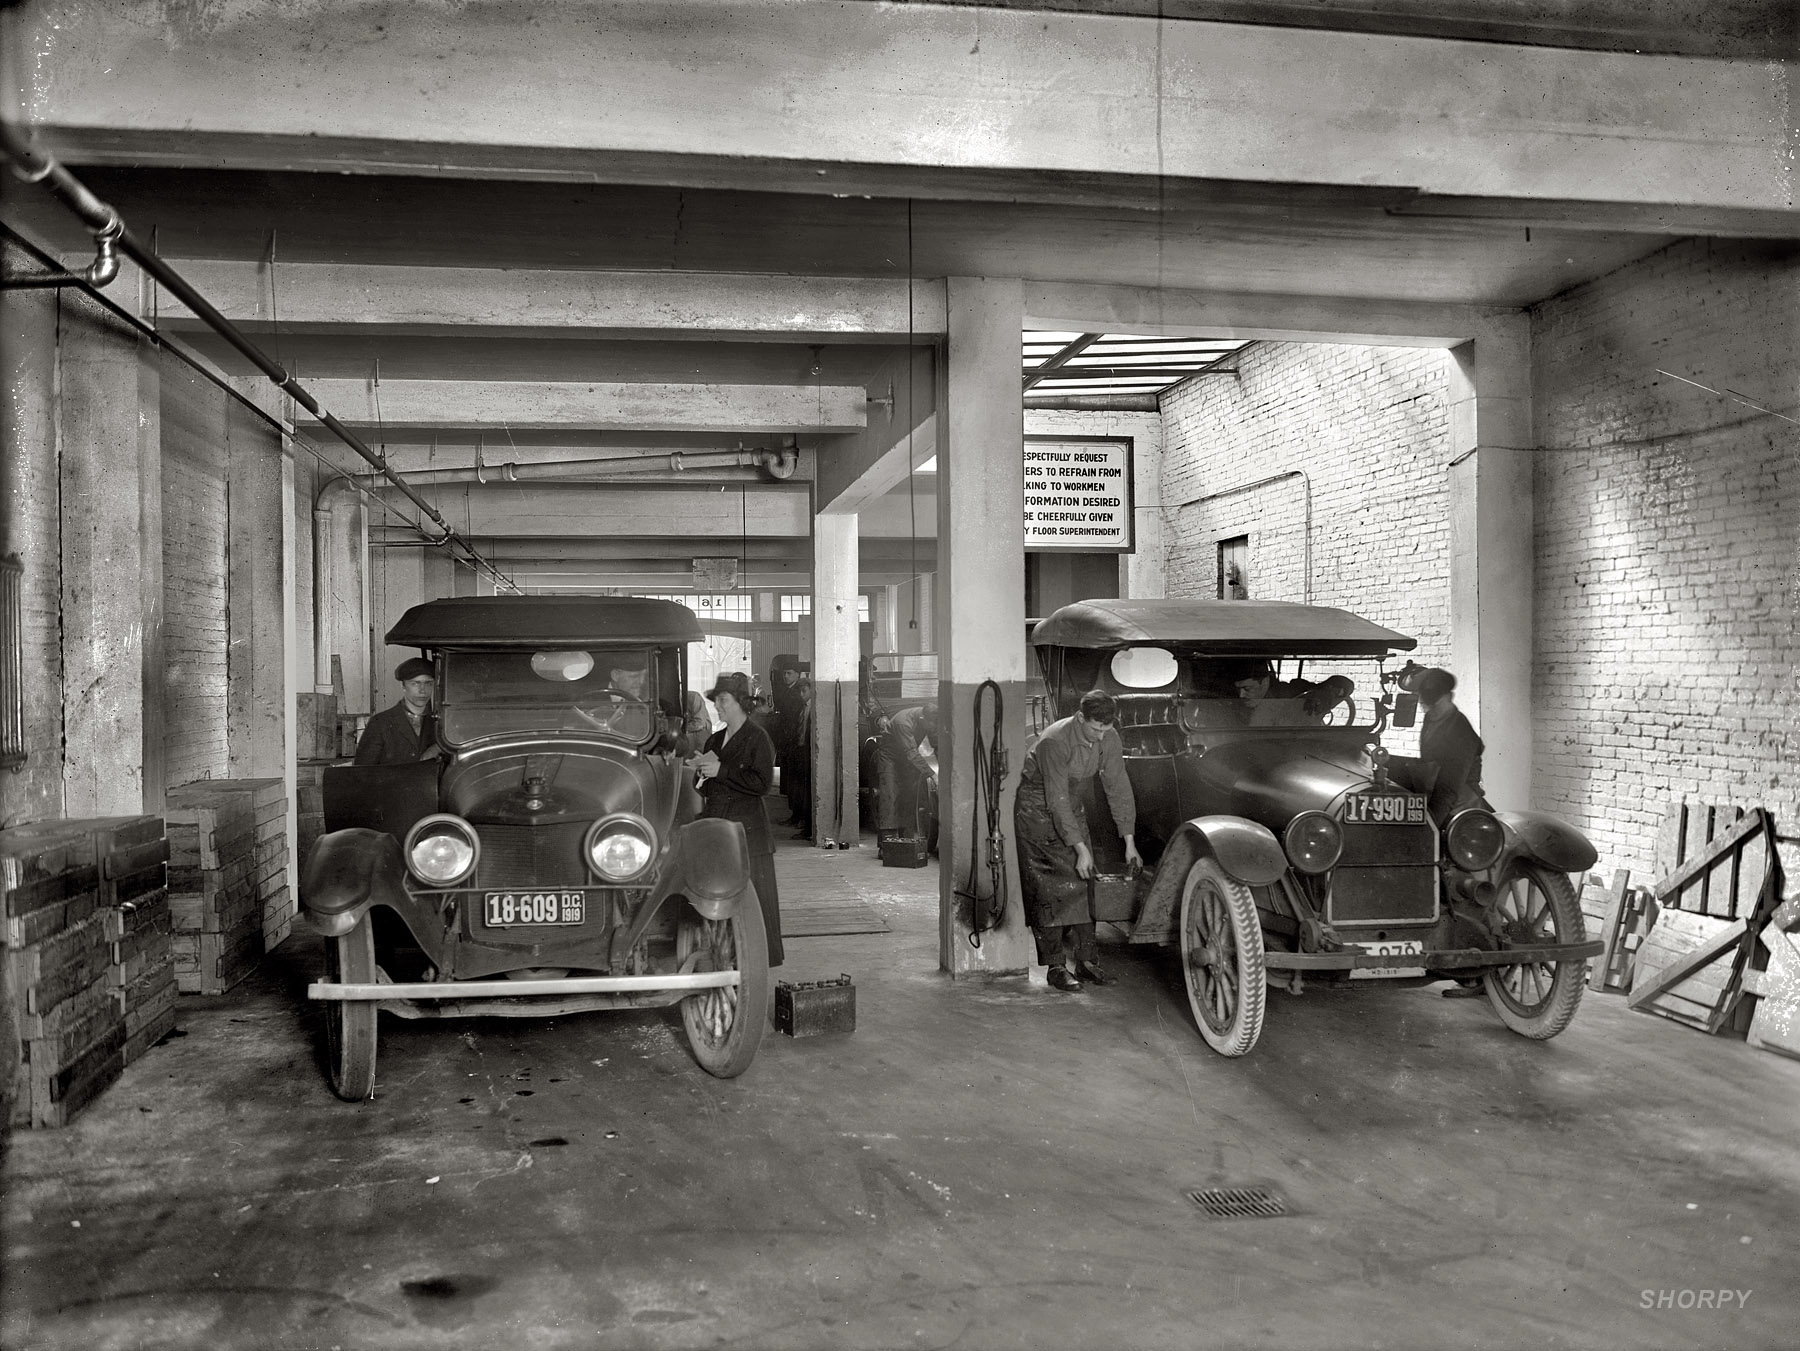 District of Columbia, 1919. Willard Service Station, Washington Battery Co., 1623 L Street. The sign: "We respectfully request customers to refrain from talking to workmen. Any information desired will be cheerfully given out by floor superintendent." National Photo Company glass negative. View full size.